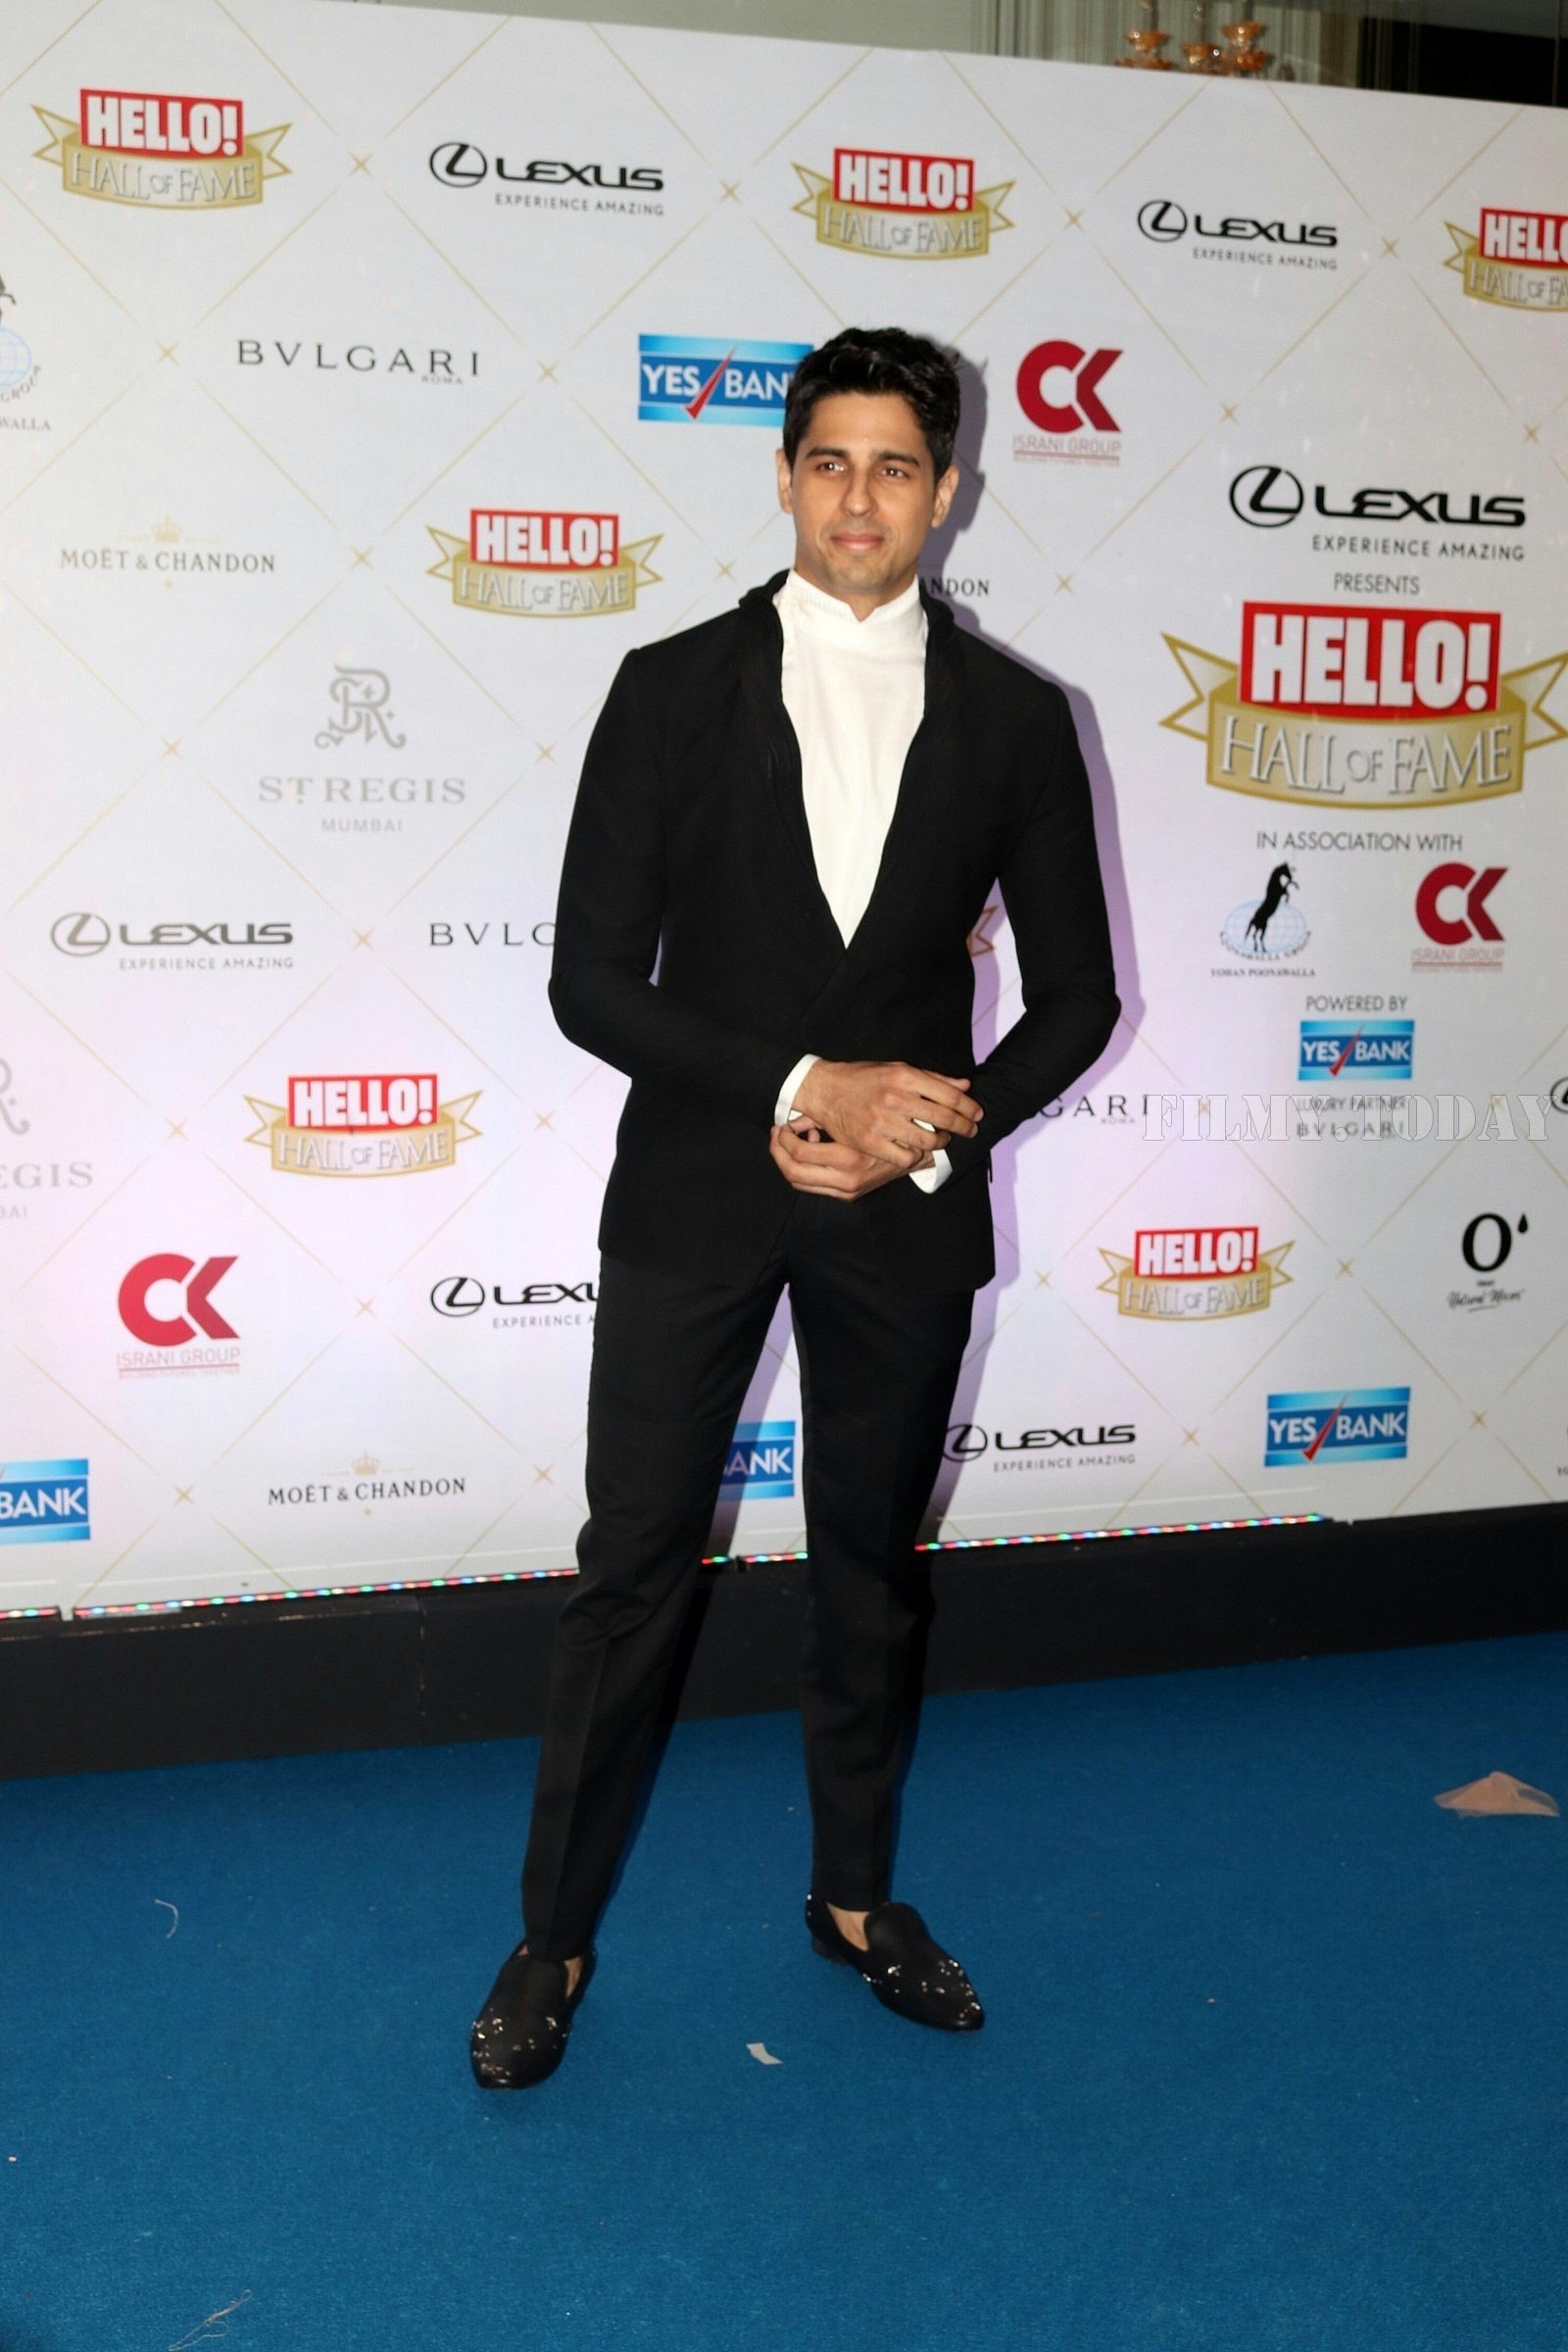 Sidharth Malhotra - Photos: Hello Hall of Fame Awards 2018 at St. Regis In Mumbai | Picture 1571463